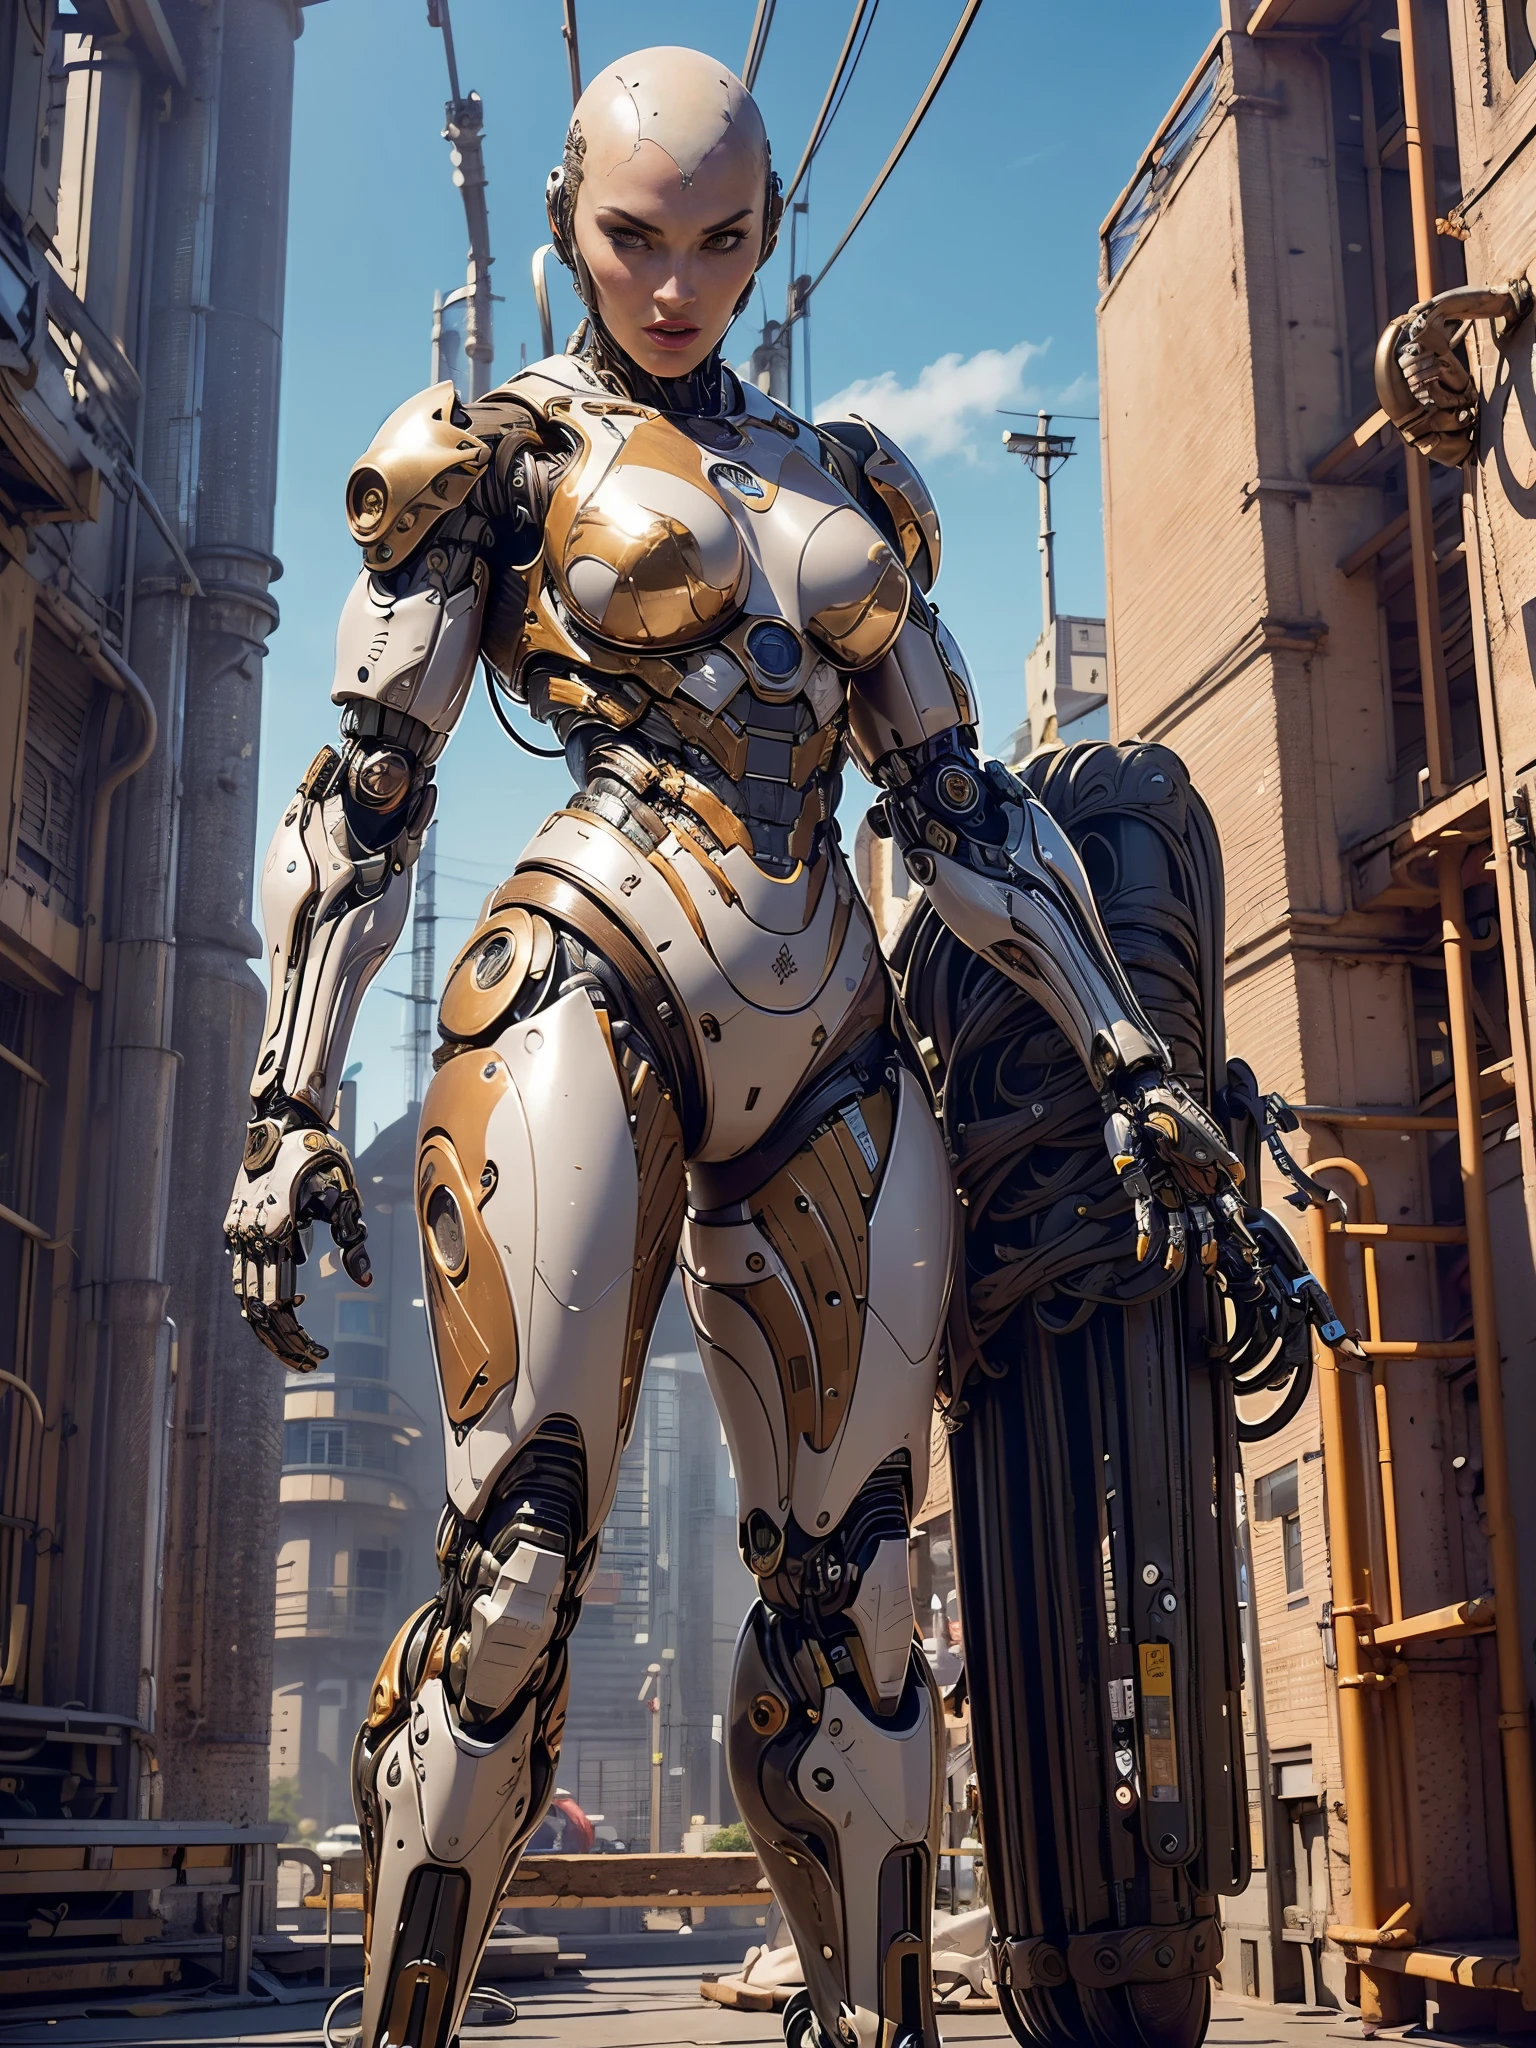 (beautiful muscular female cyborg:1.25), (megan-fox:1.5), (full body pose), (metallic muscular armor:1.5), (no hair), (bald head covered in cables:1.5), (robotic mechanical physique:1.5), (super muscular female cyborg:1.5), (covered in cables and mechanical muscles:1.5), (android muscular anatomy:1.5), (perfect fingers:1.25),(8k, RAW photo, photorealistic:1.25), sci fi atmosphere, futuristic dystopia, alien landscape,